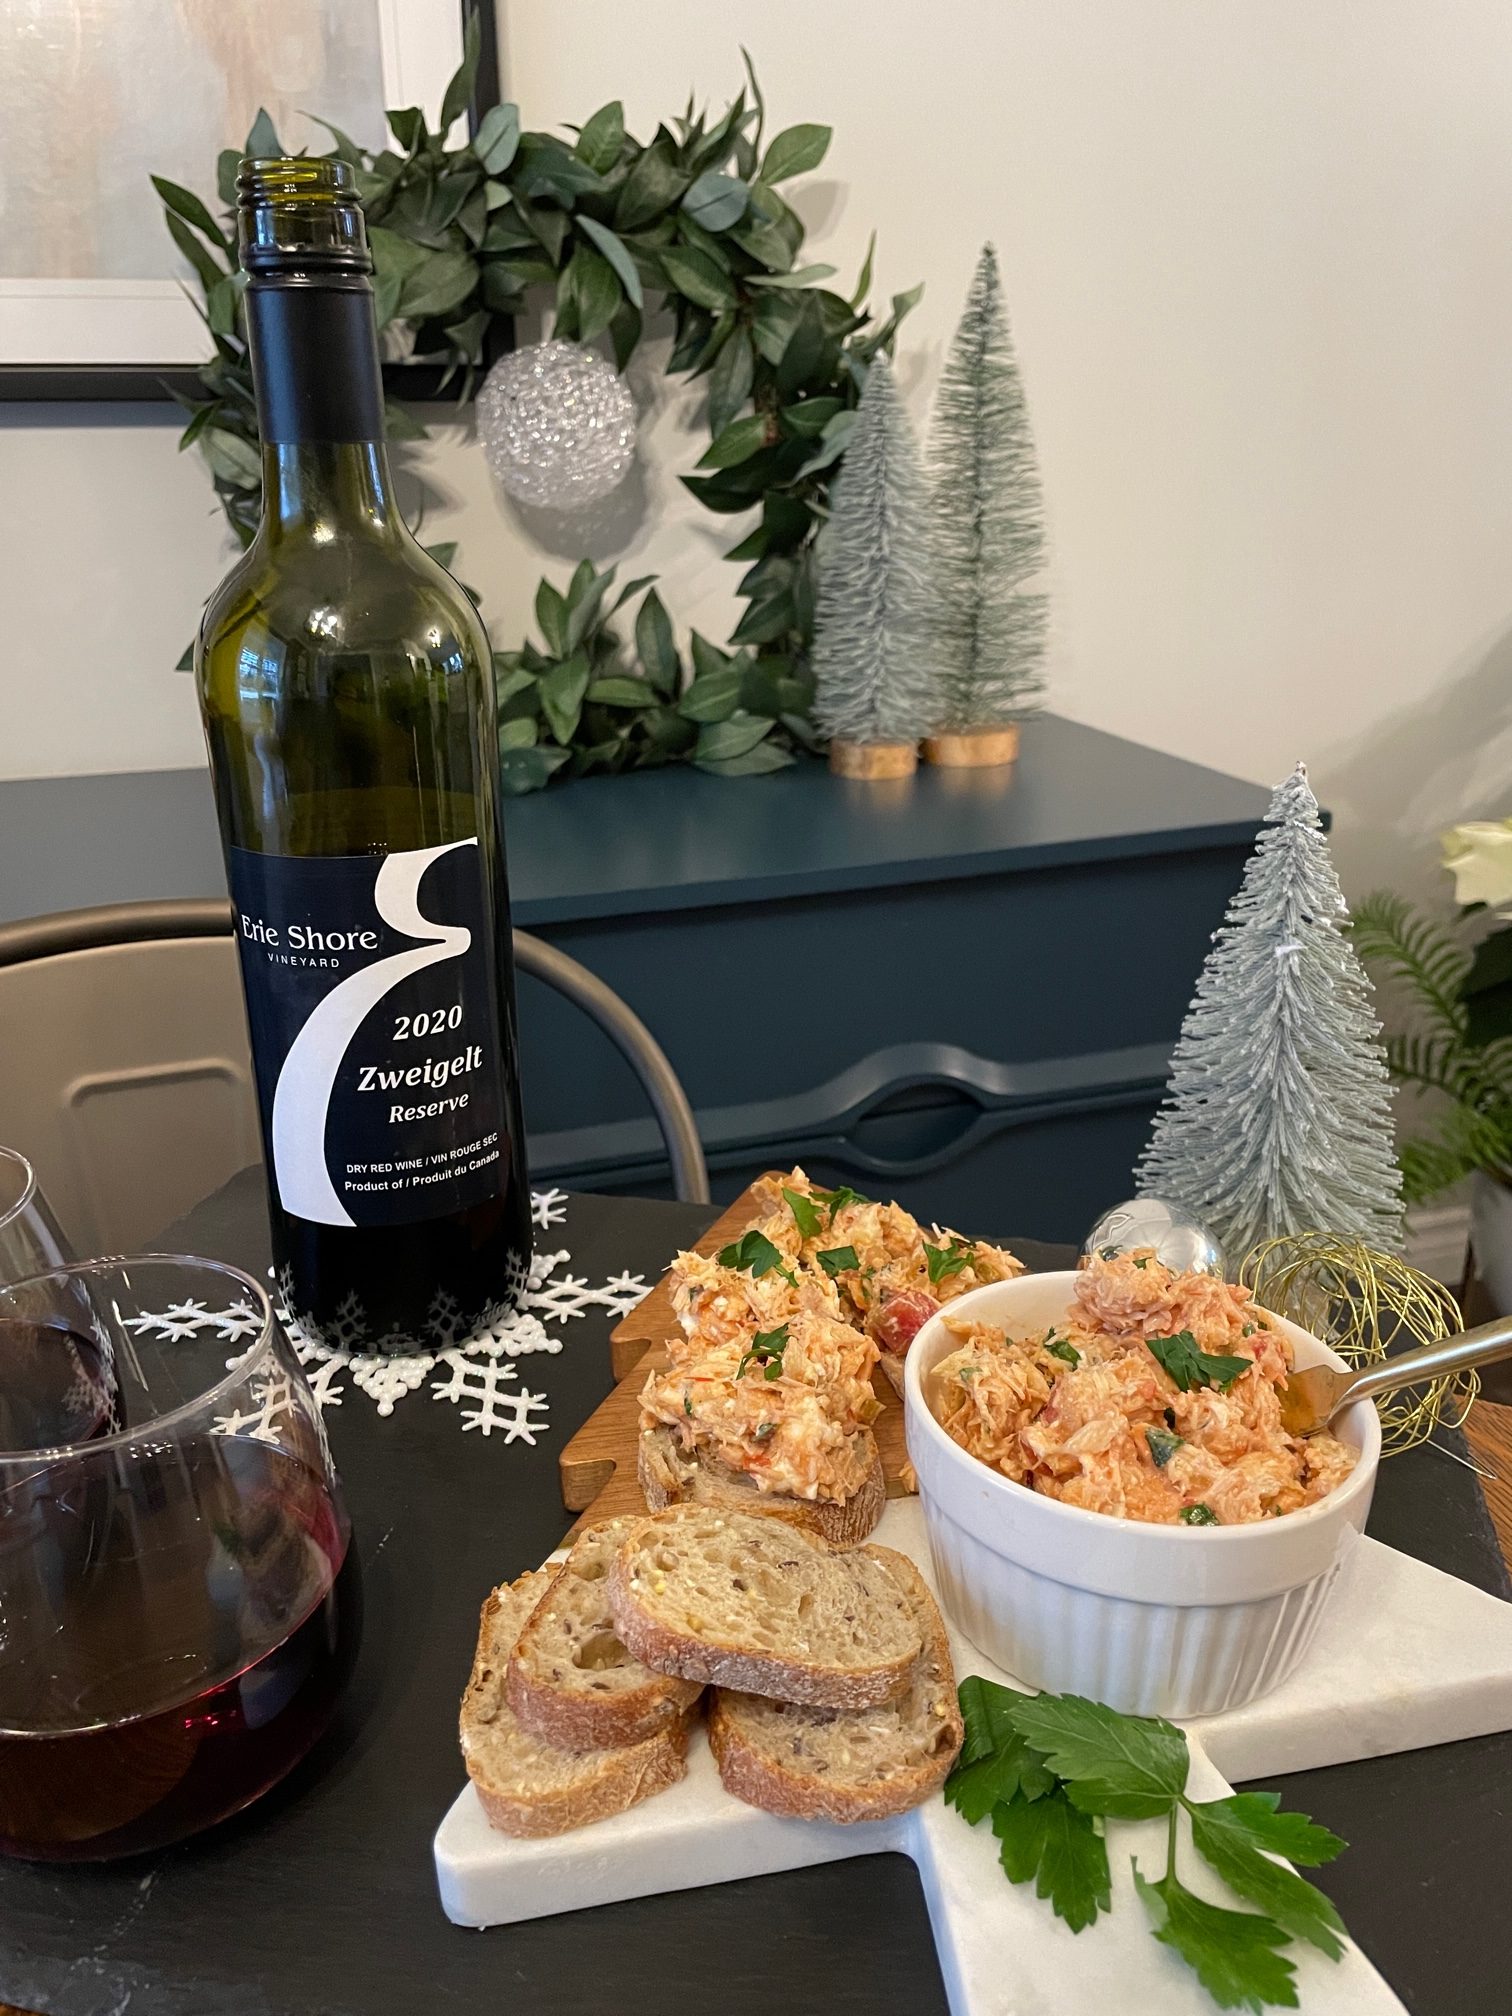 Featured image for “Erie Shore Vineyard Zweigelt 2020 Reserve with Salmon Appetizers”